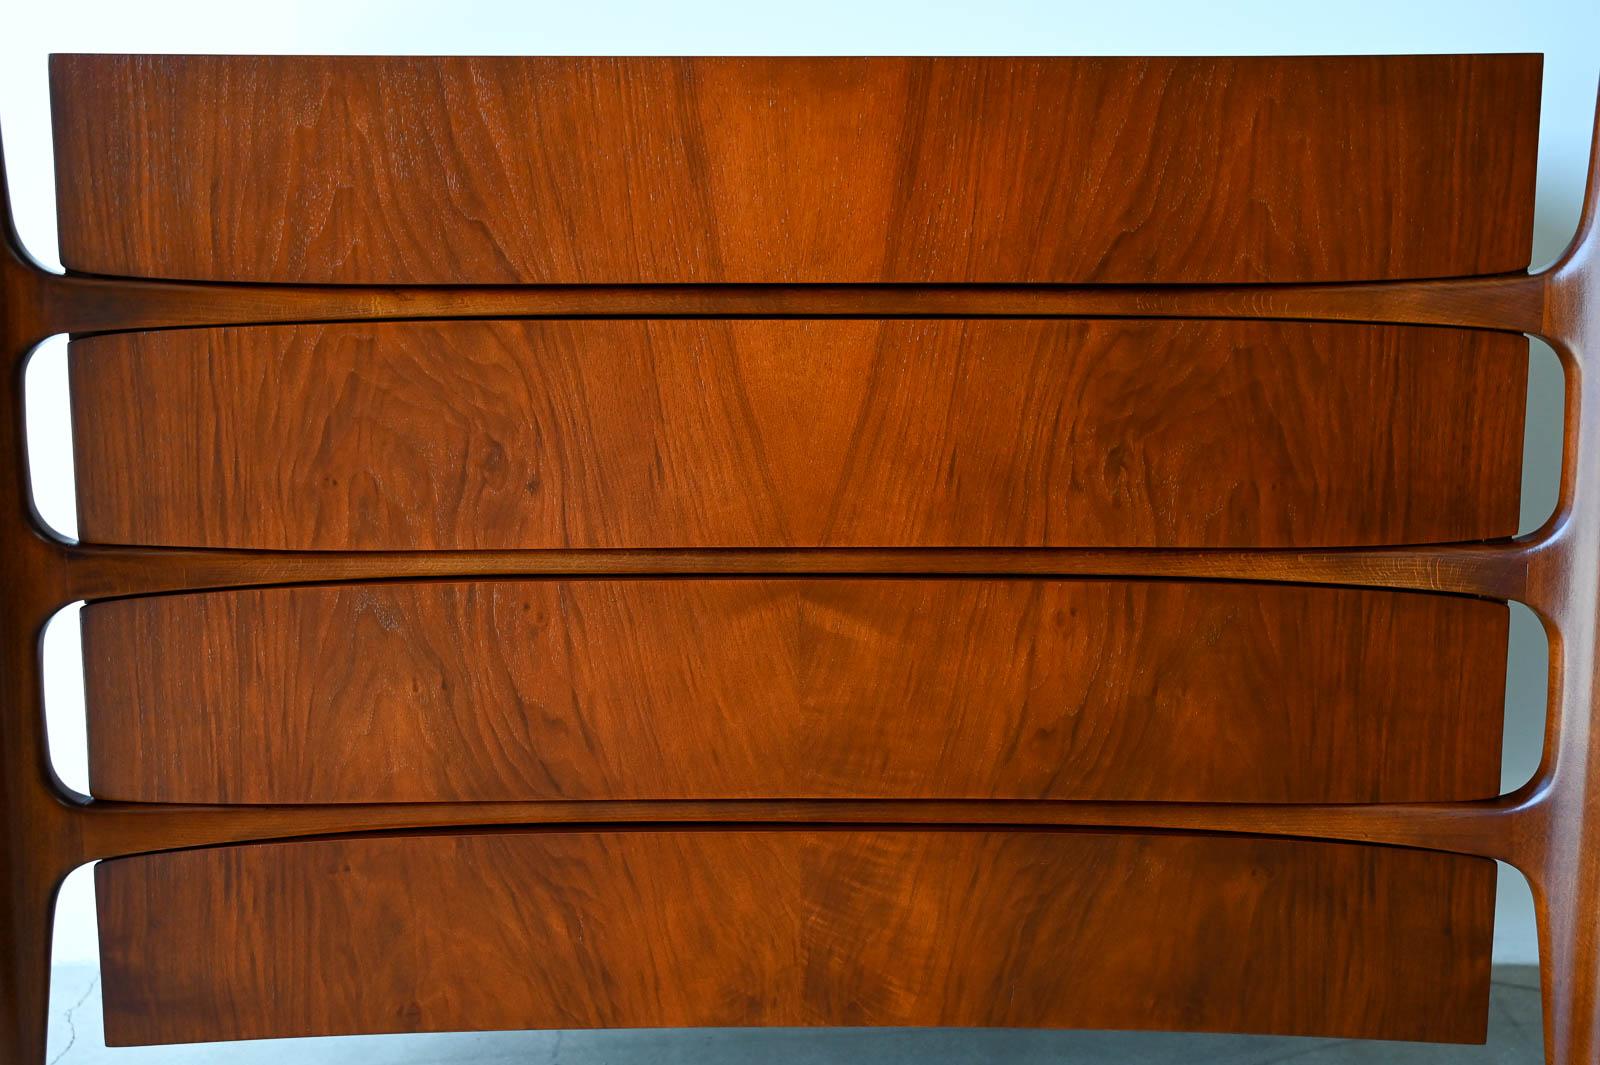 Walnut William Hinn 4 Drawer Chest of Drawers or Cabinet, ca. 1960